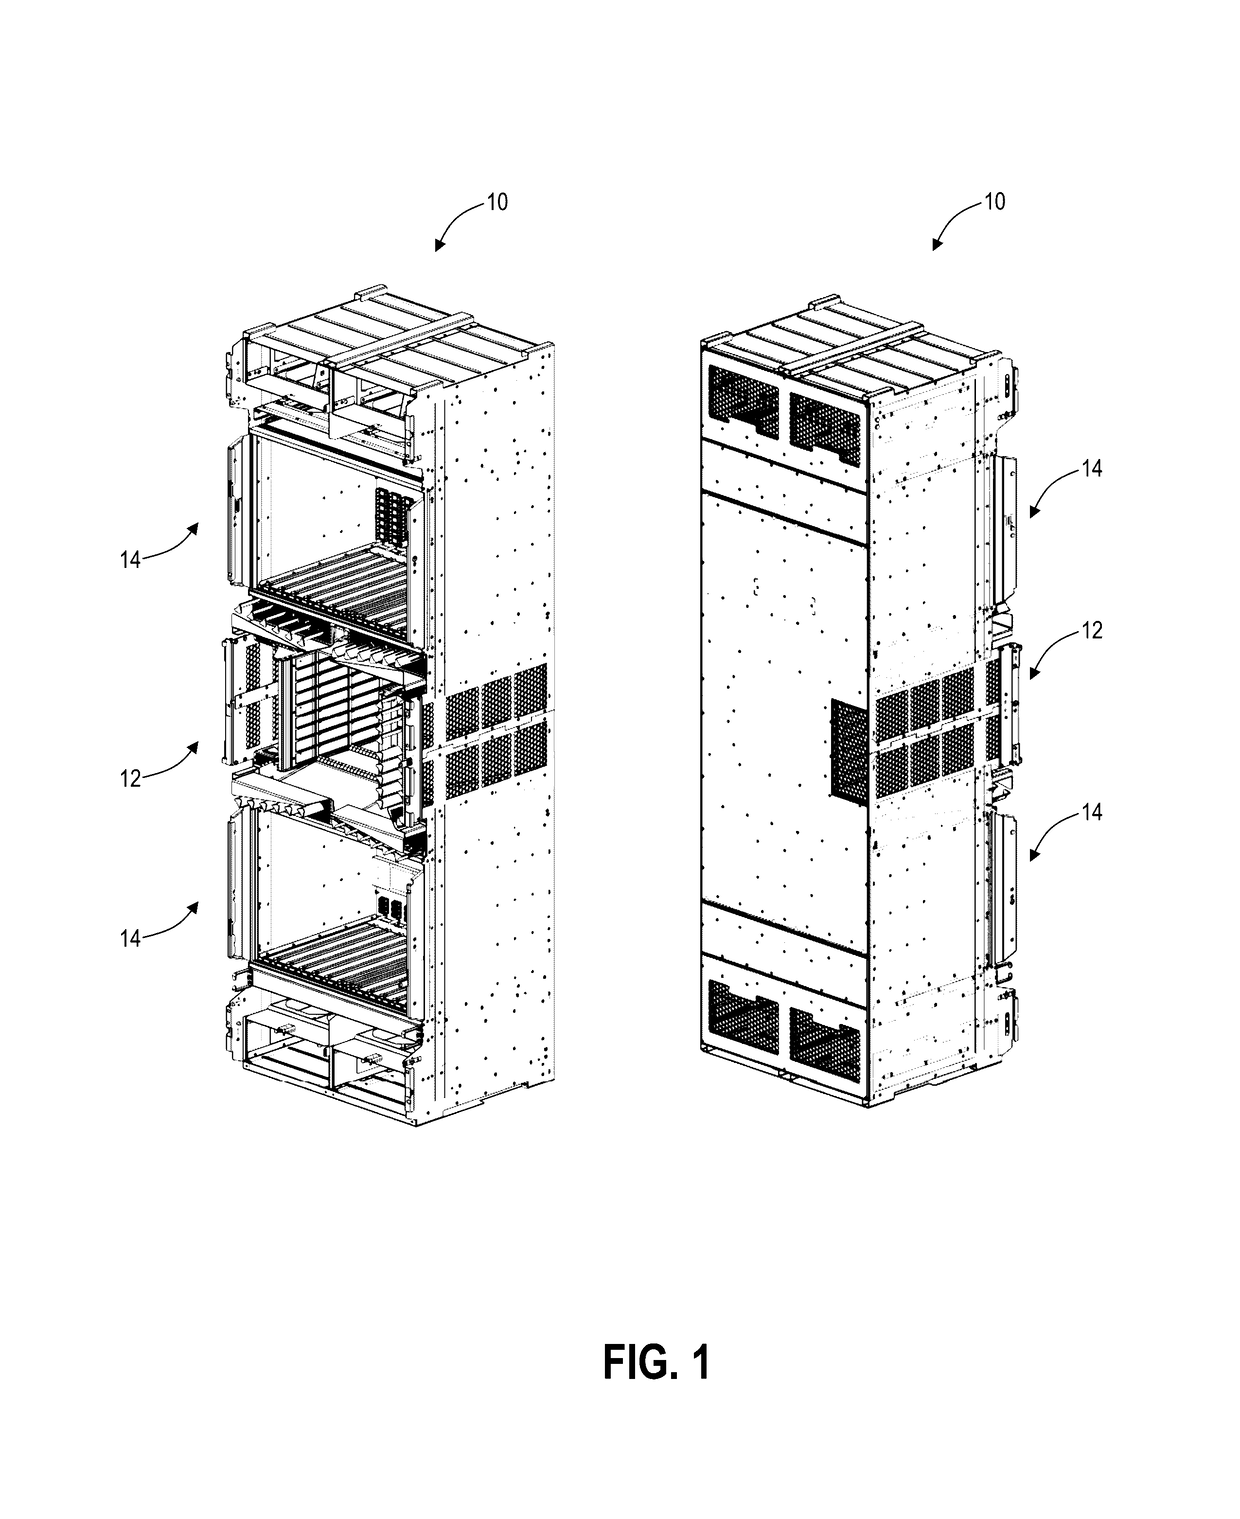 Chassis arrangement systems and methods for dual depth cards and dual depth faraday cages